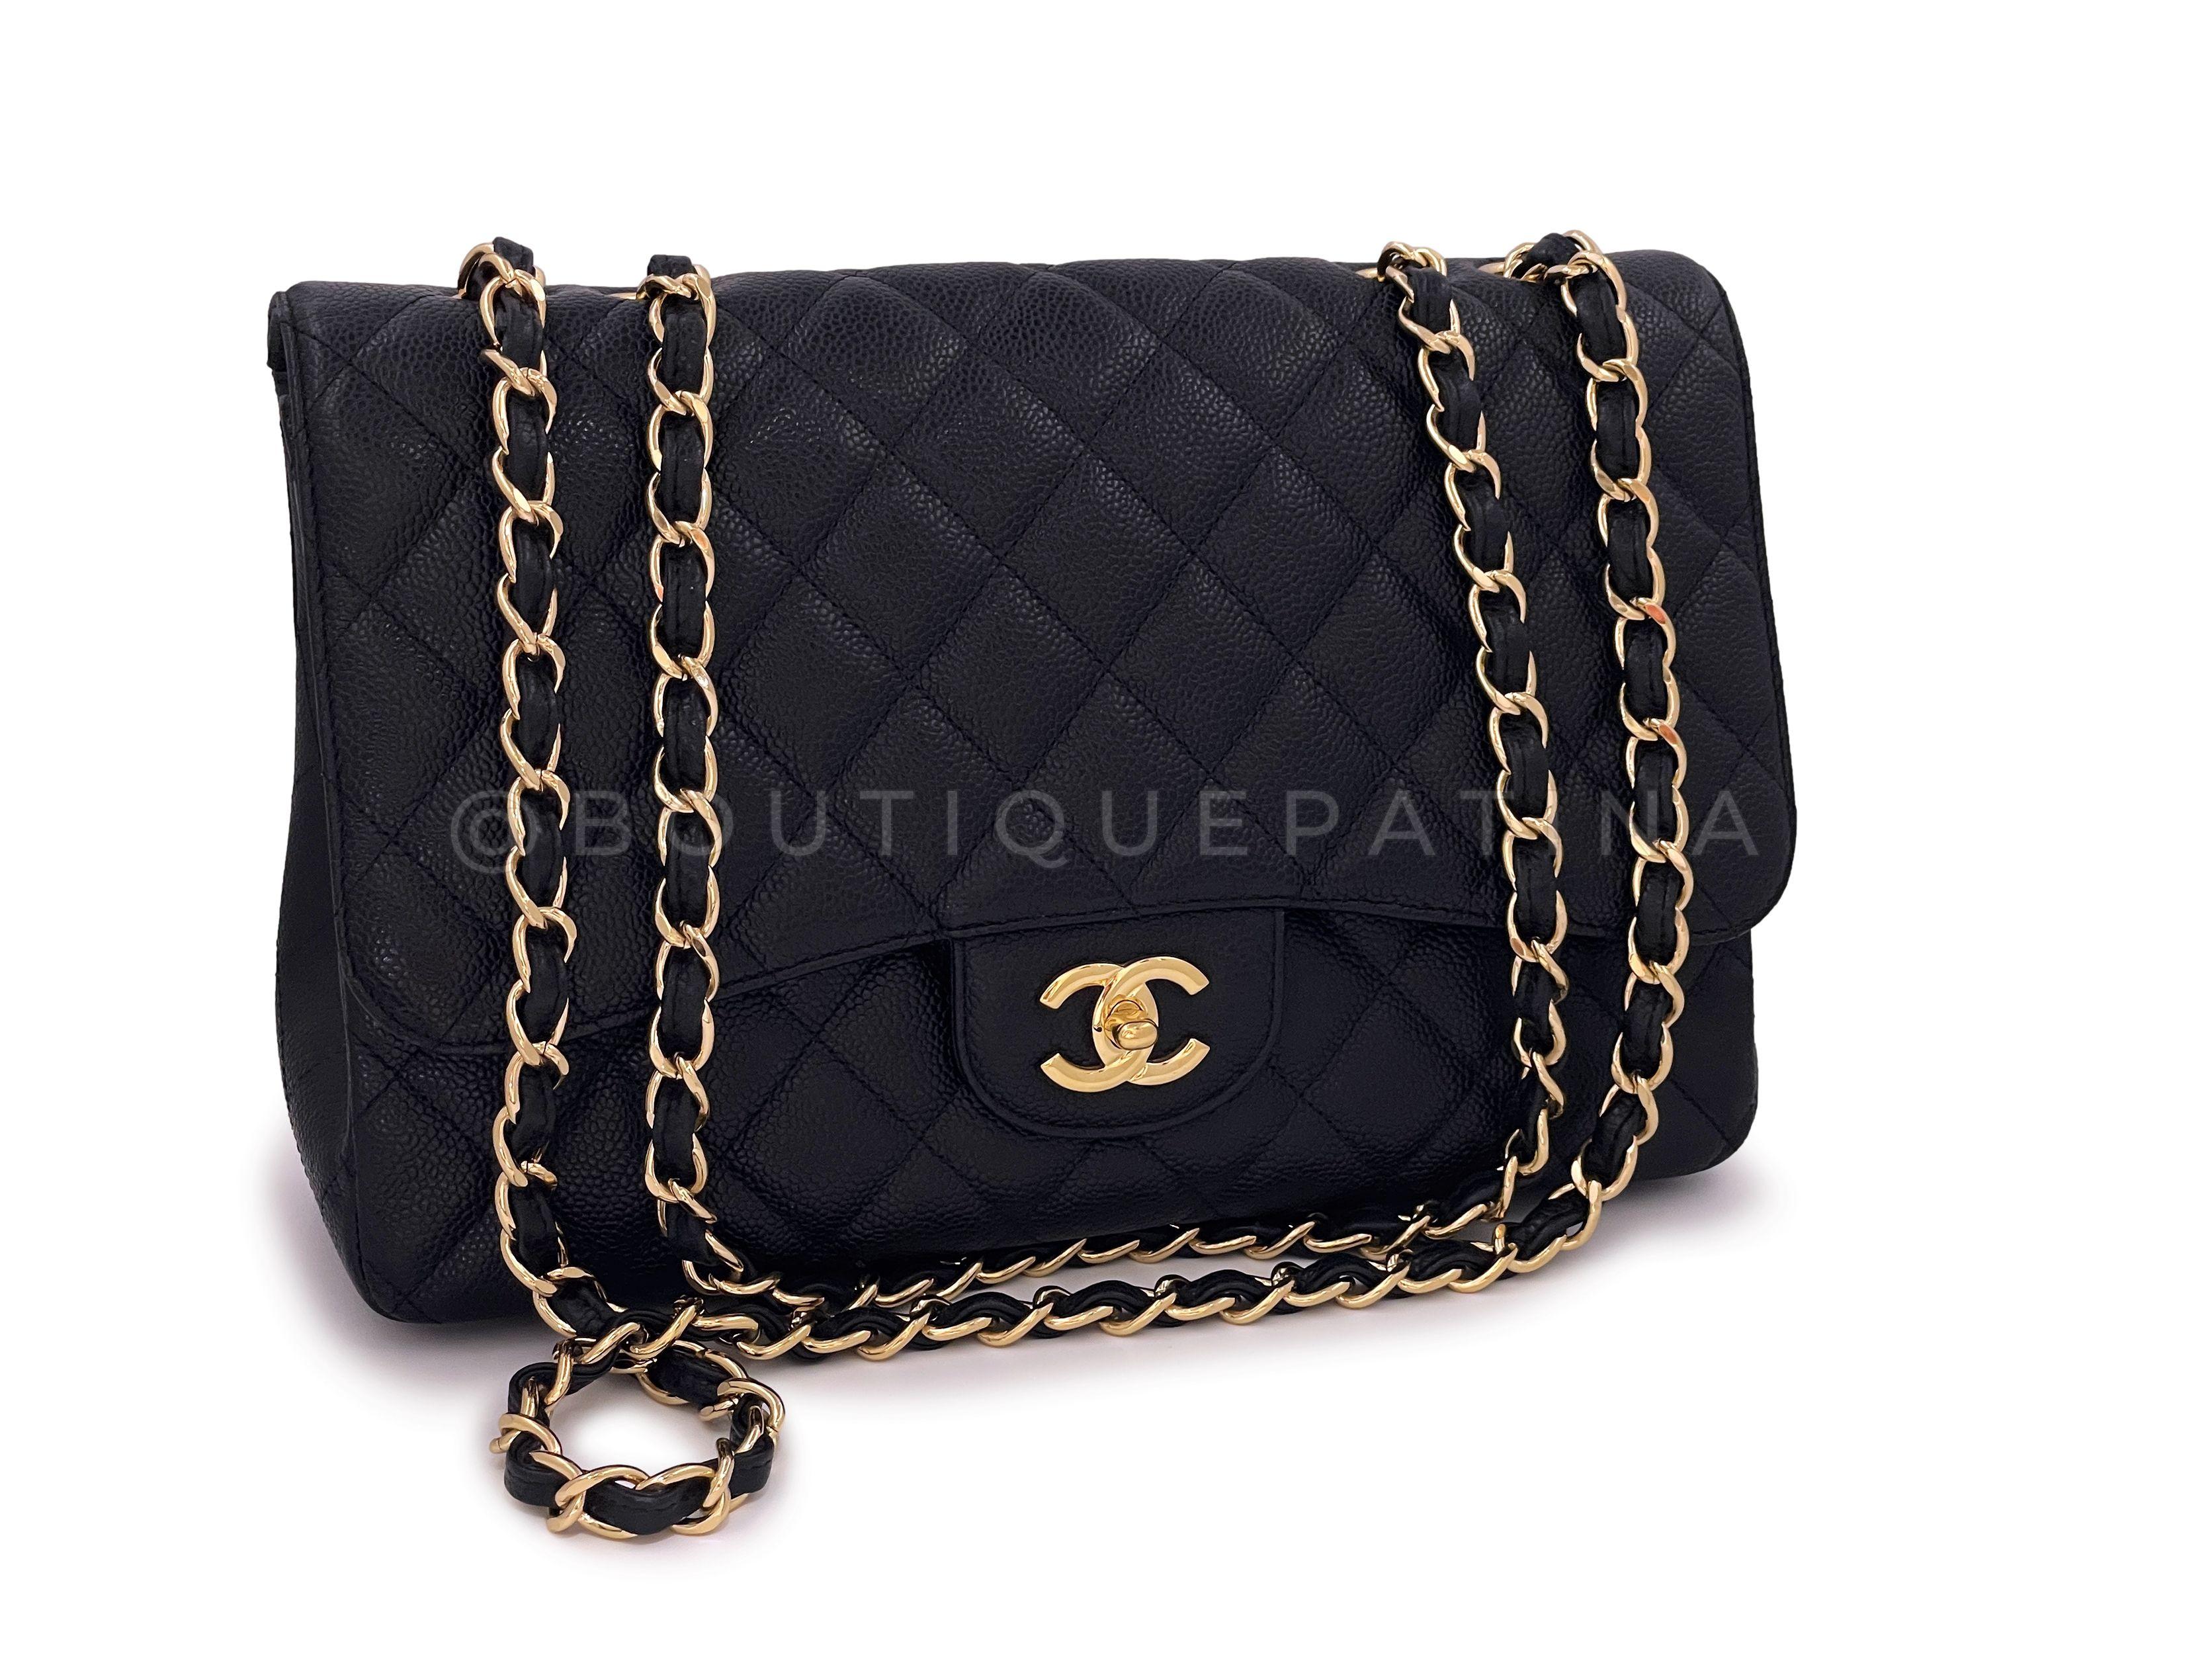 Store SKU: 65108
The iconic holy grail bag is the Chanel Classic Flap. Coveted for its simplicity and elegance - woven chain double strap that can be worn short or long, turnlock CC clasp, lambskin interior.

This is the single size classic flap,